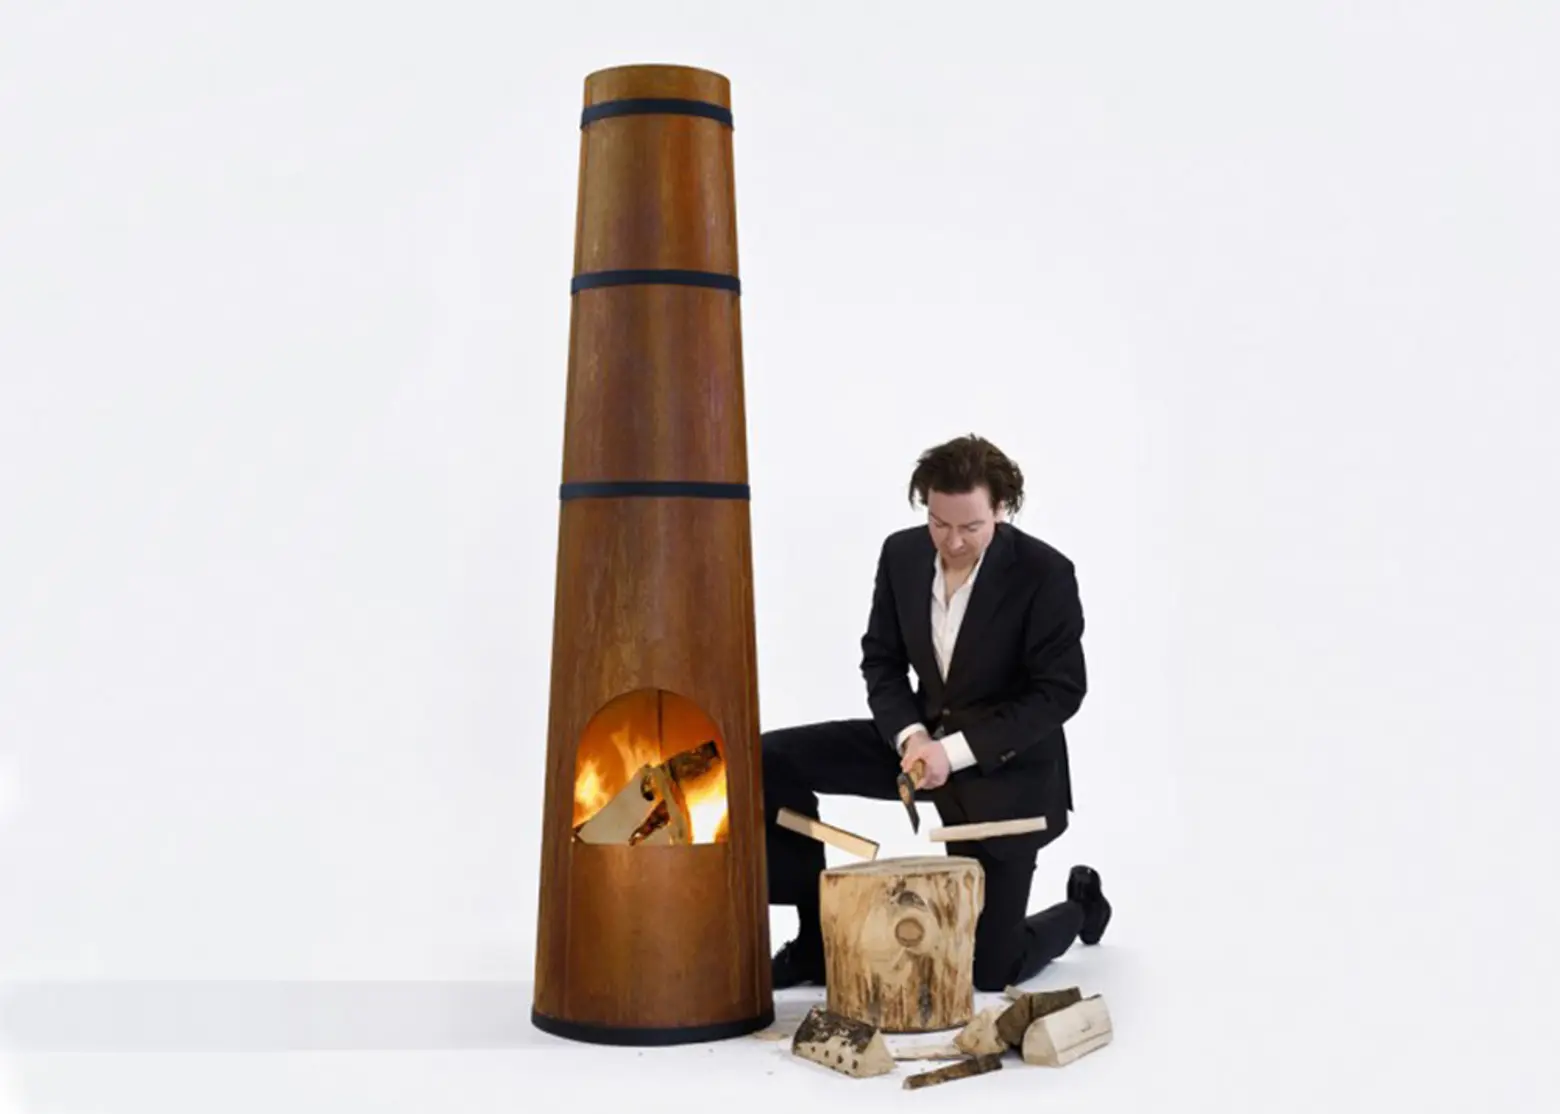 Frederik Roijé’s Smokestack Fireplace Is Inspired by Dutch Factories